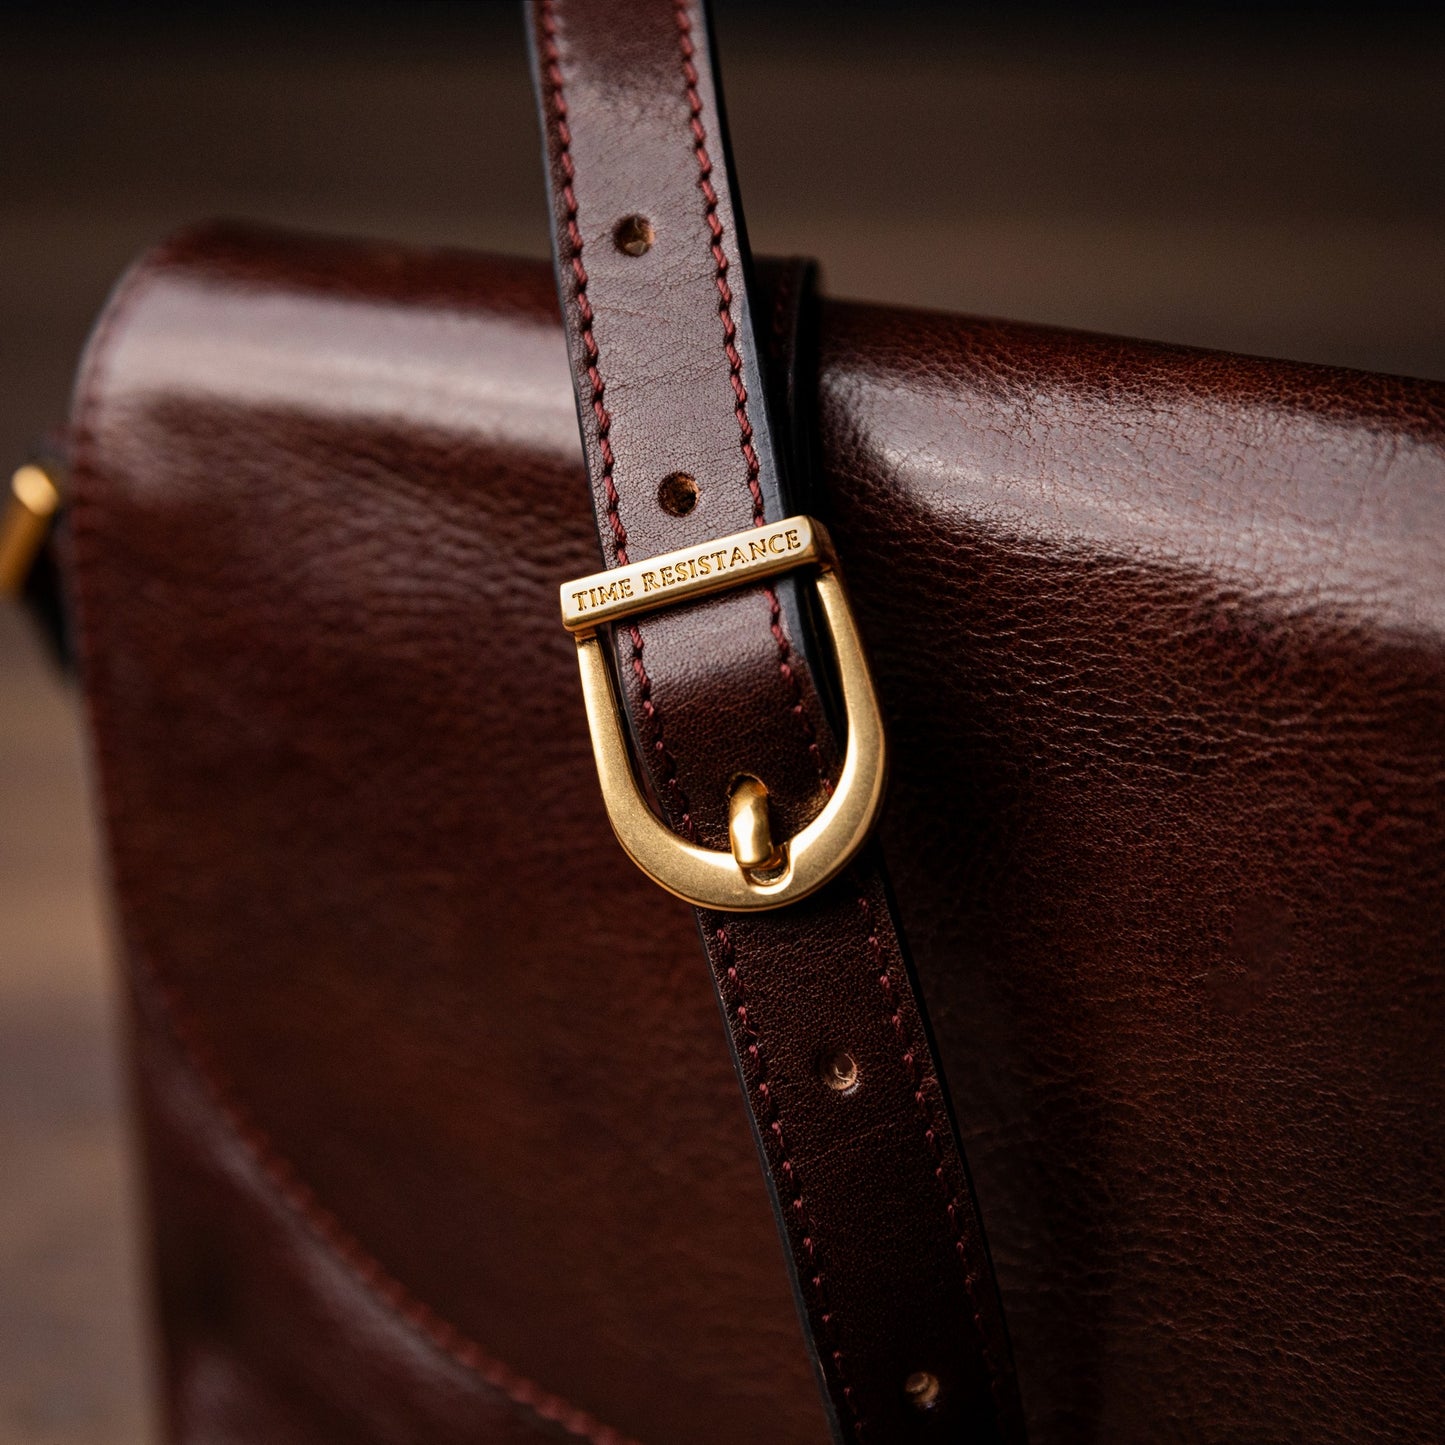 Leather Messenger Bag - A Room with a View